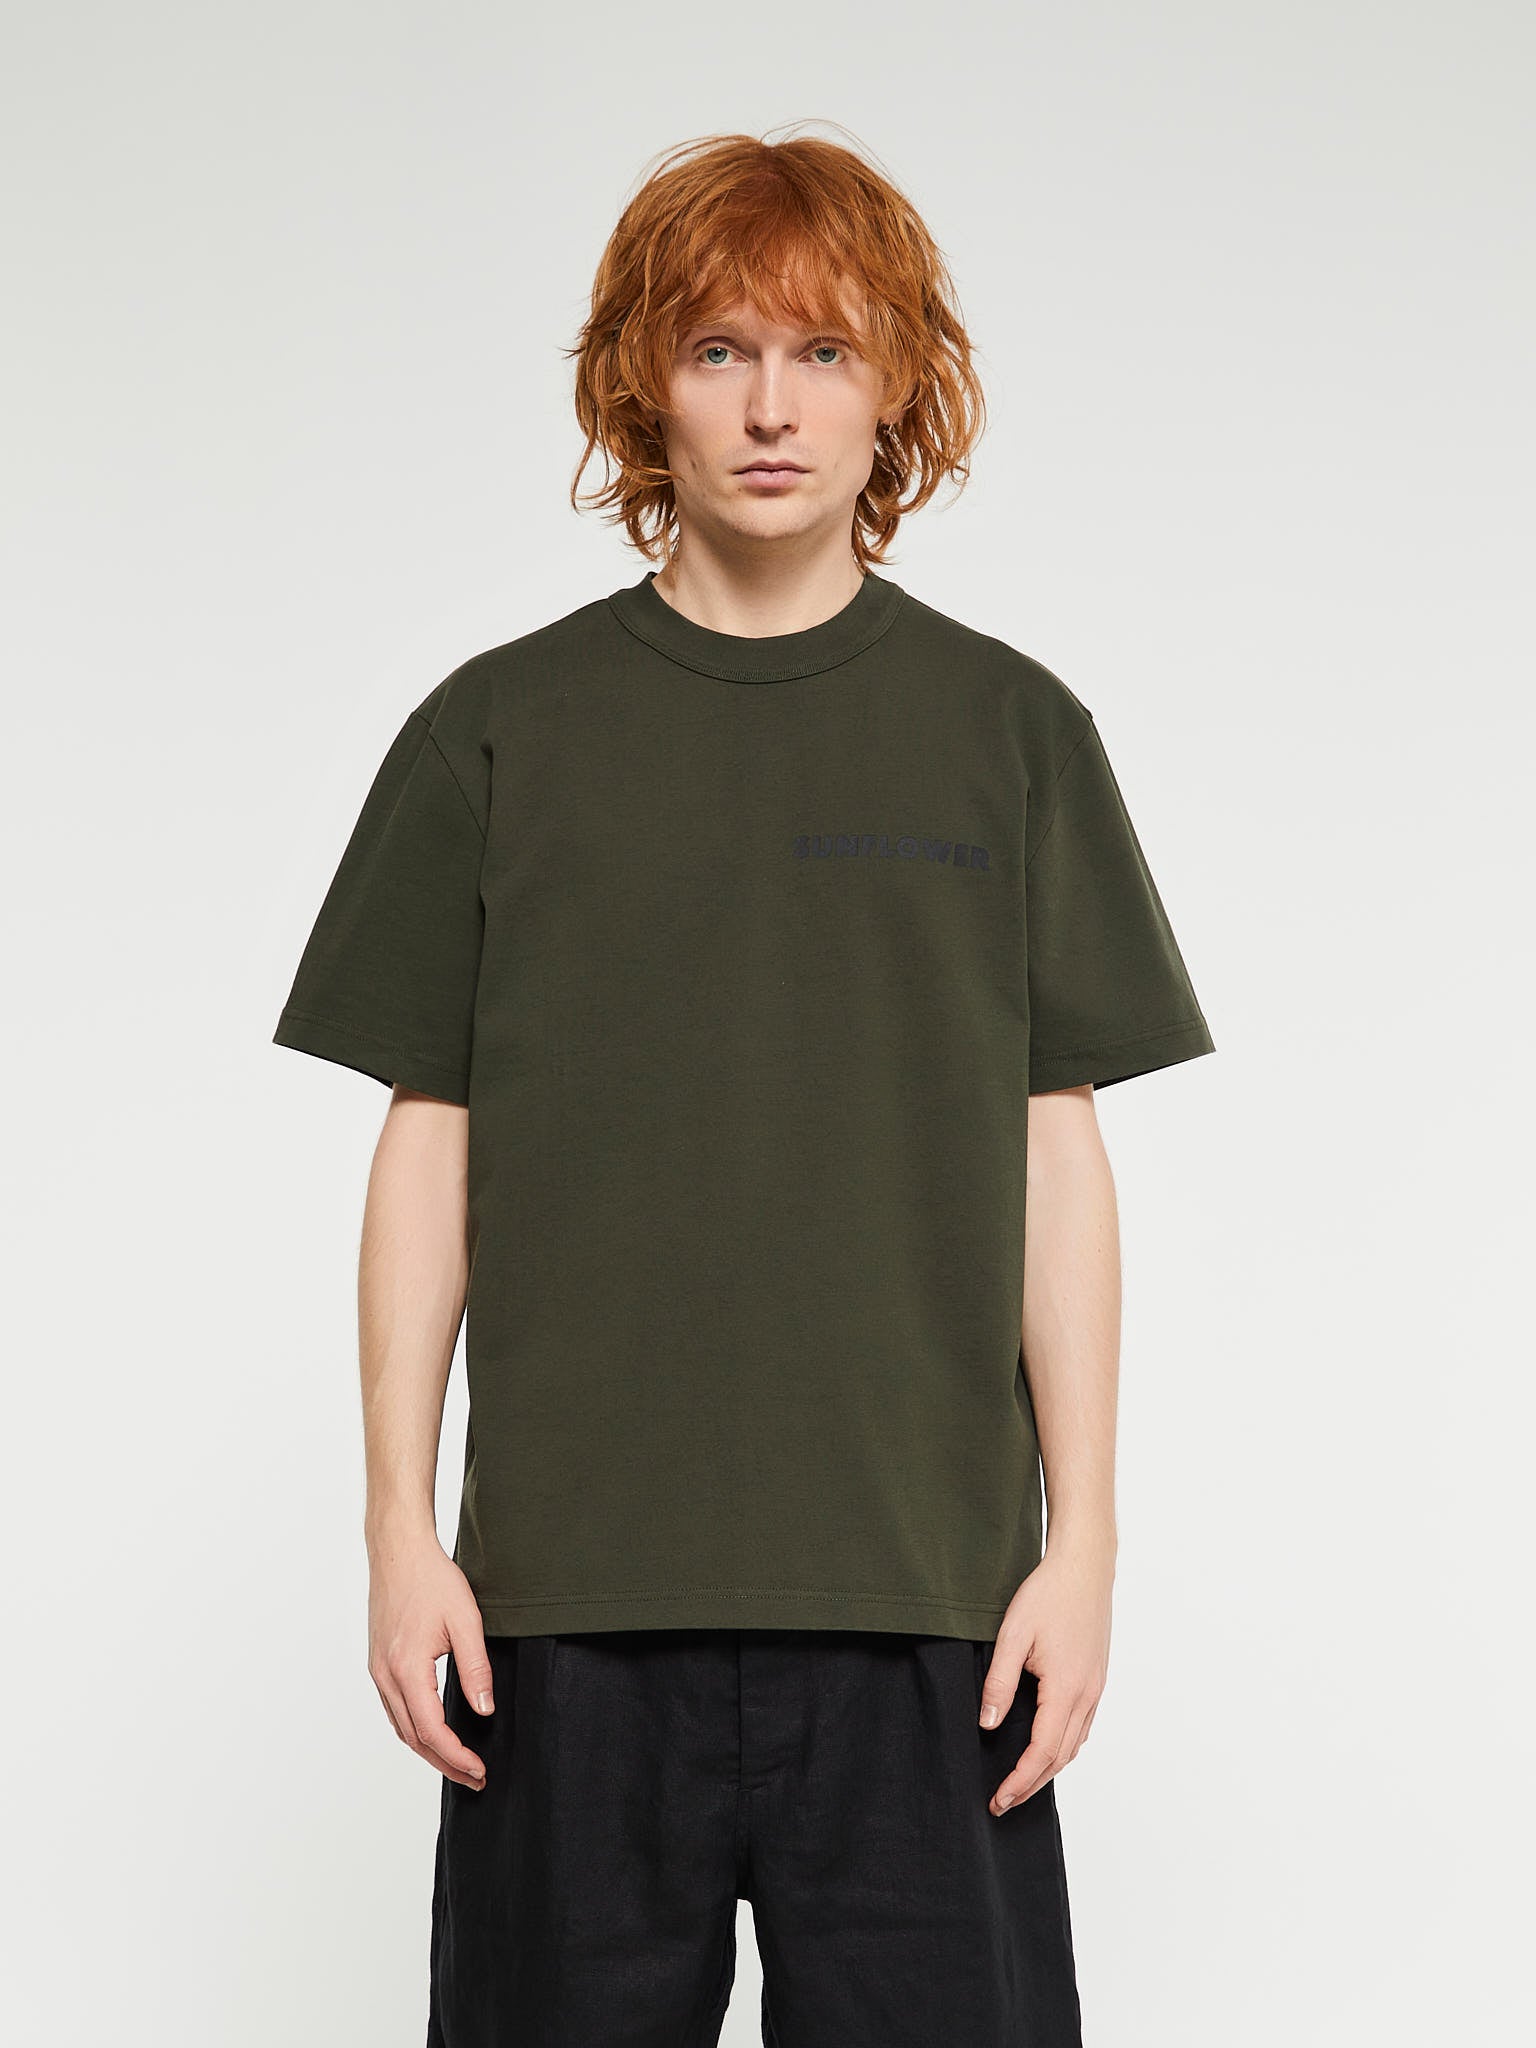 Master Logo T-Shirt in Army Green